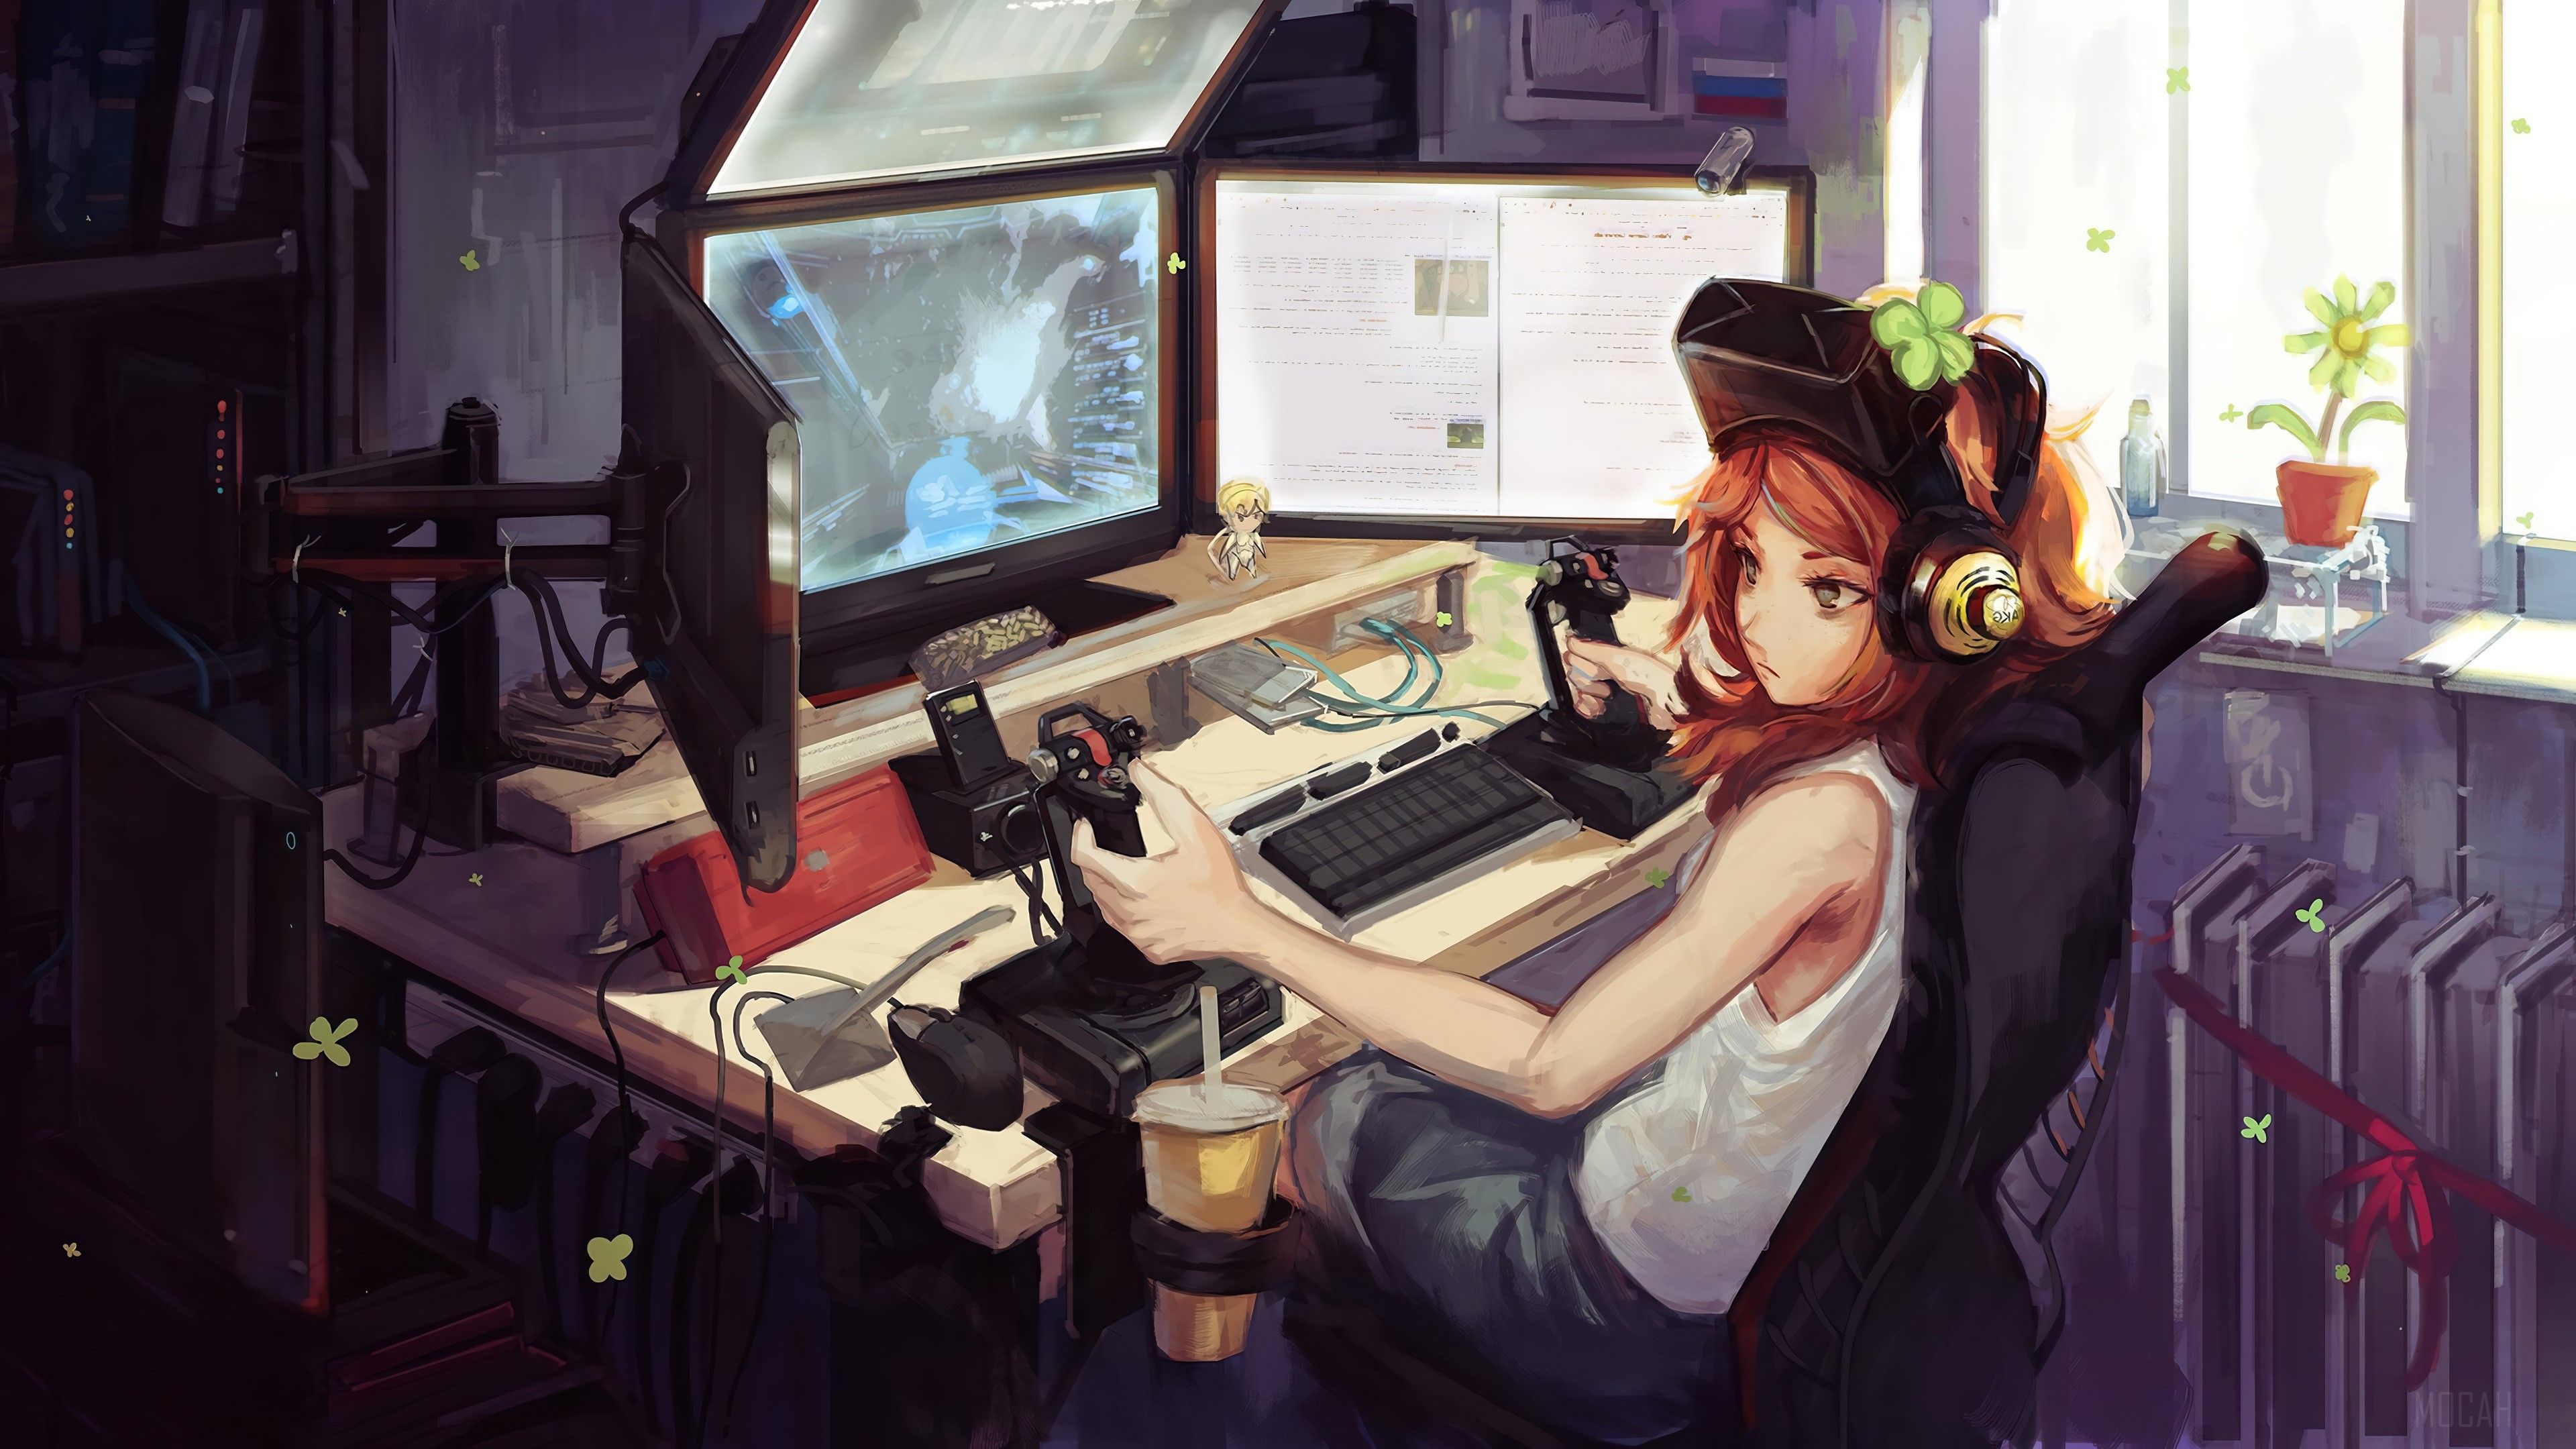 A girl playing video games on a computer with a steering wheel and pedals - Gaming